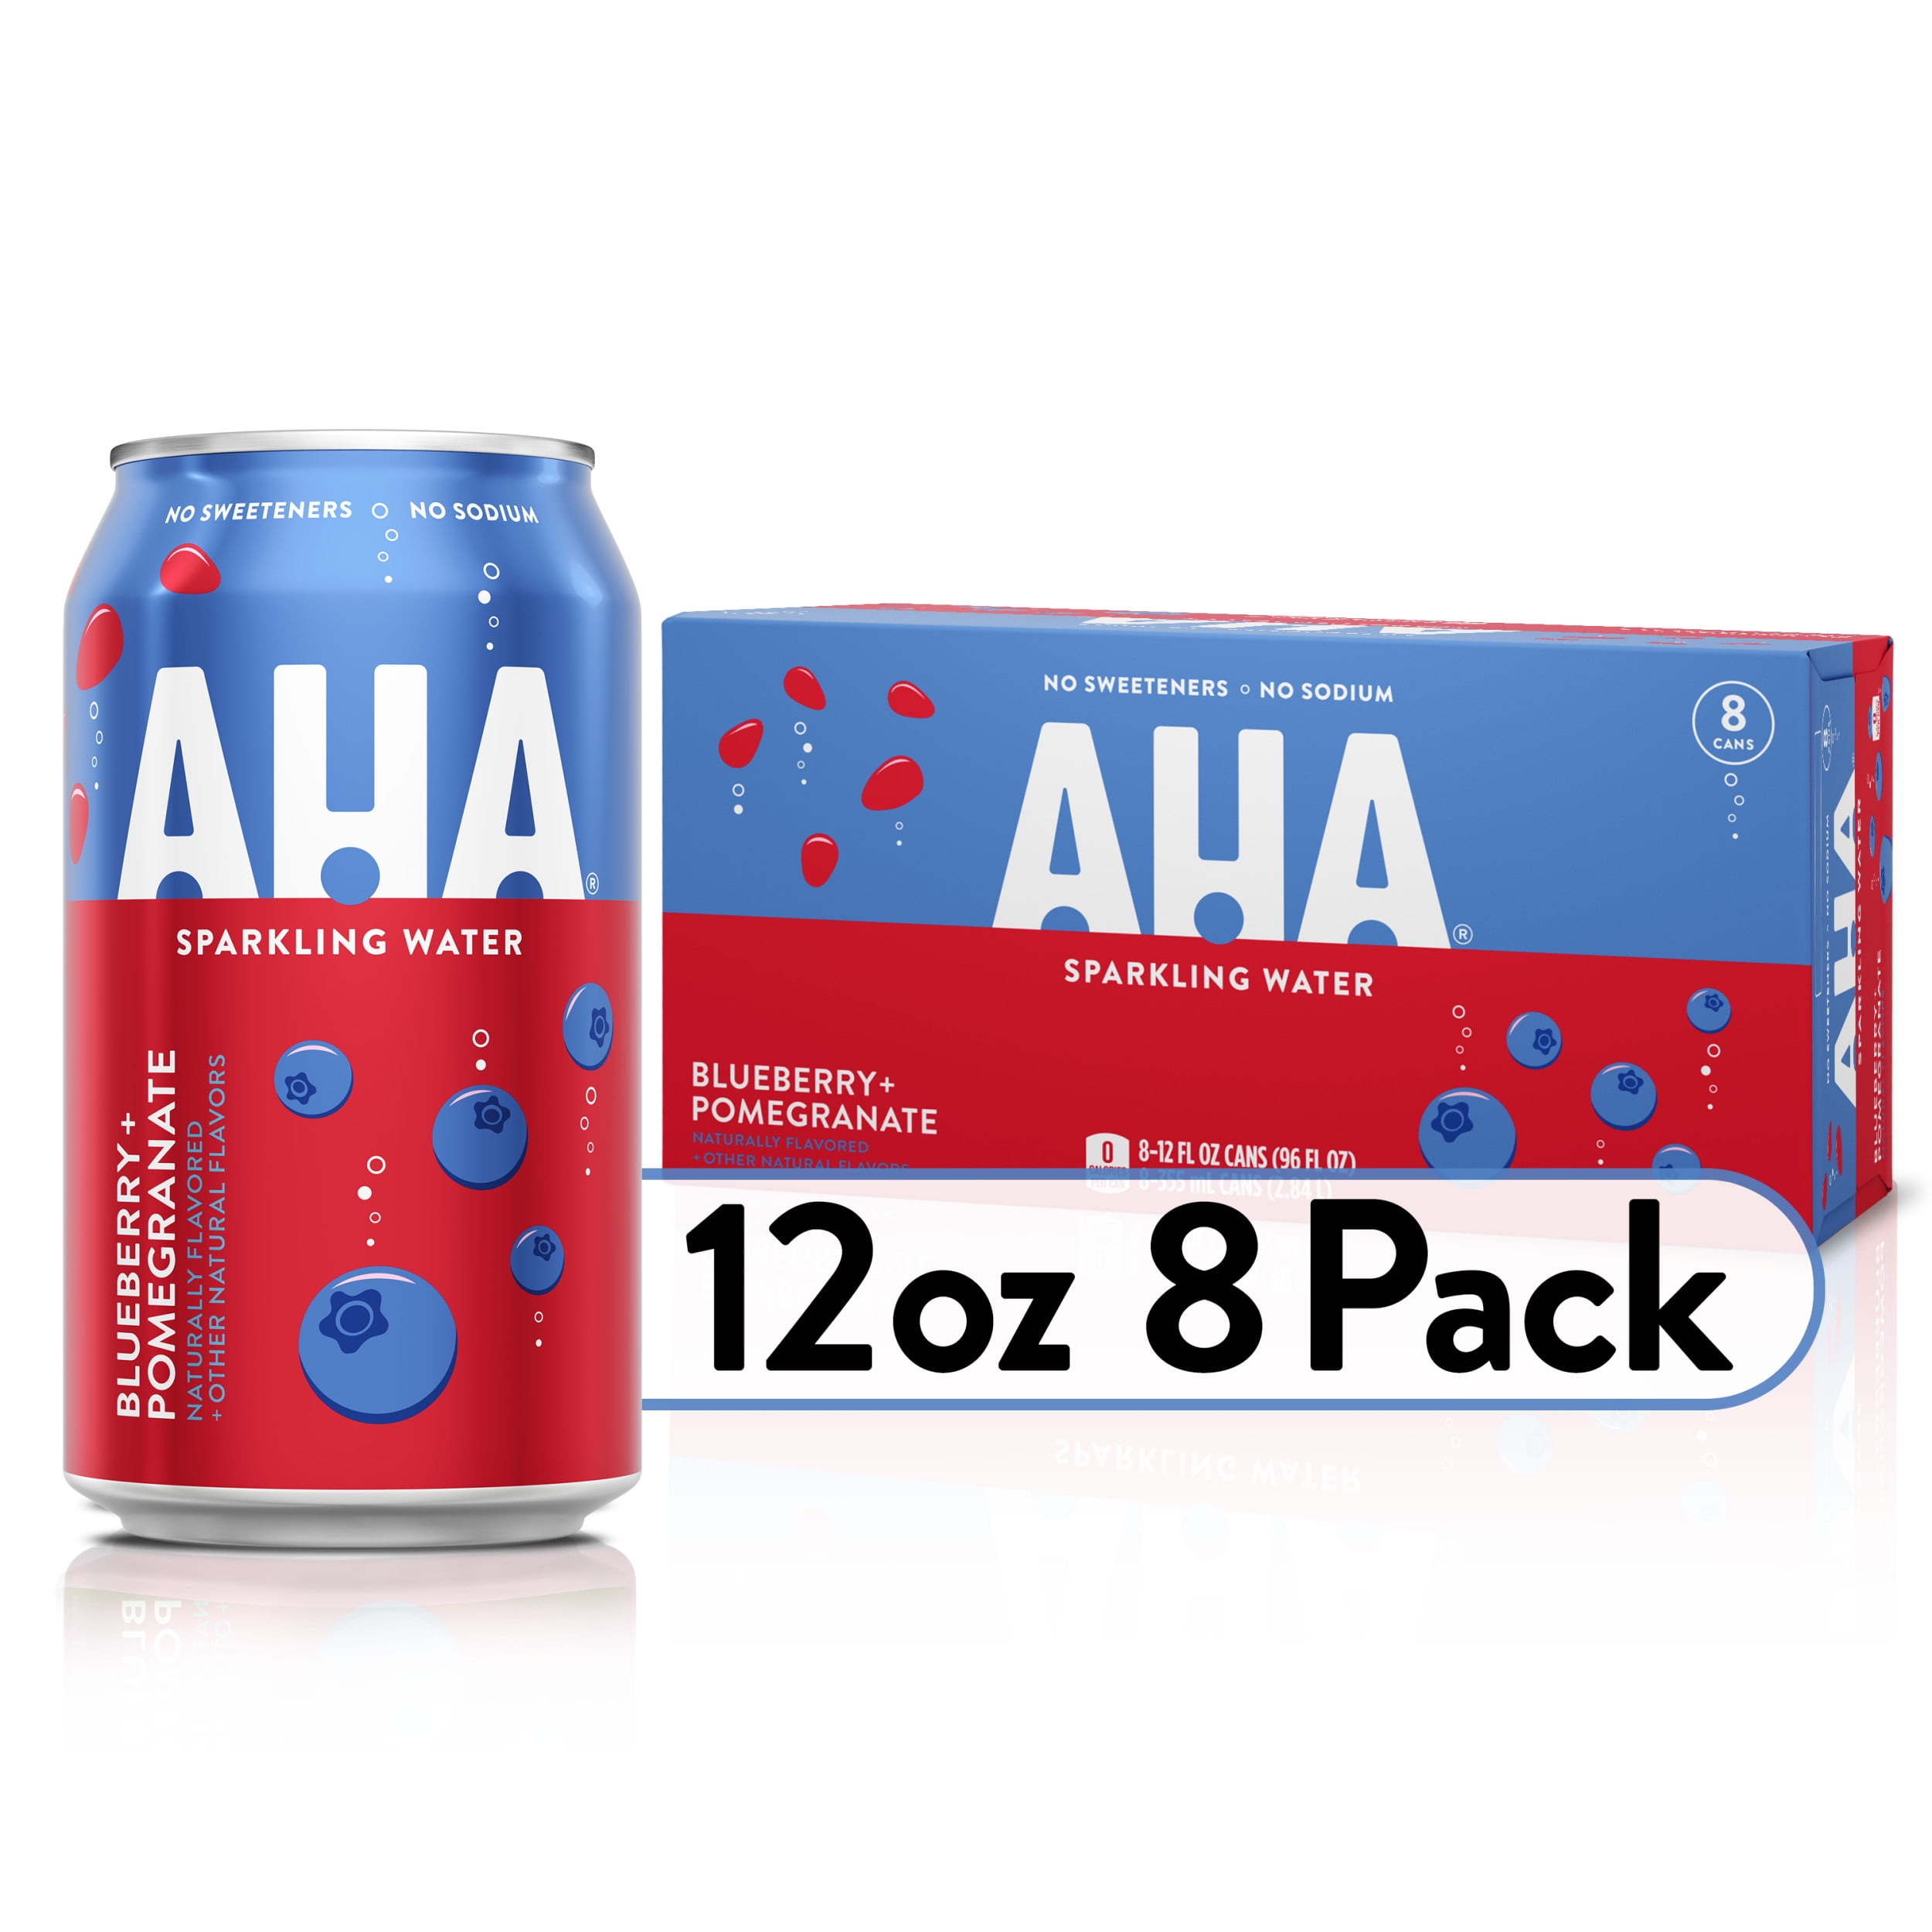 AHA Blueberry Pomegranate Sparkling Water, 12 fl oz, 8 Cans